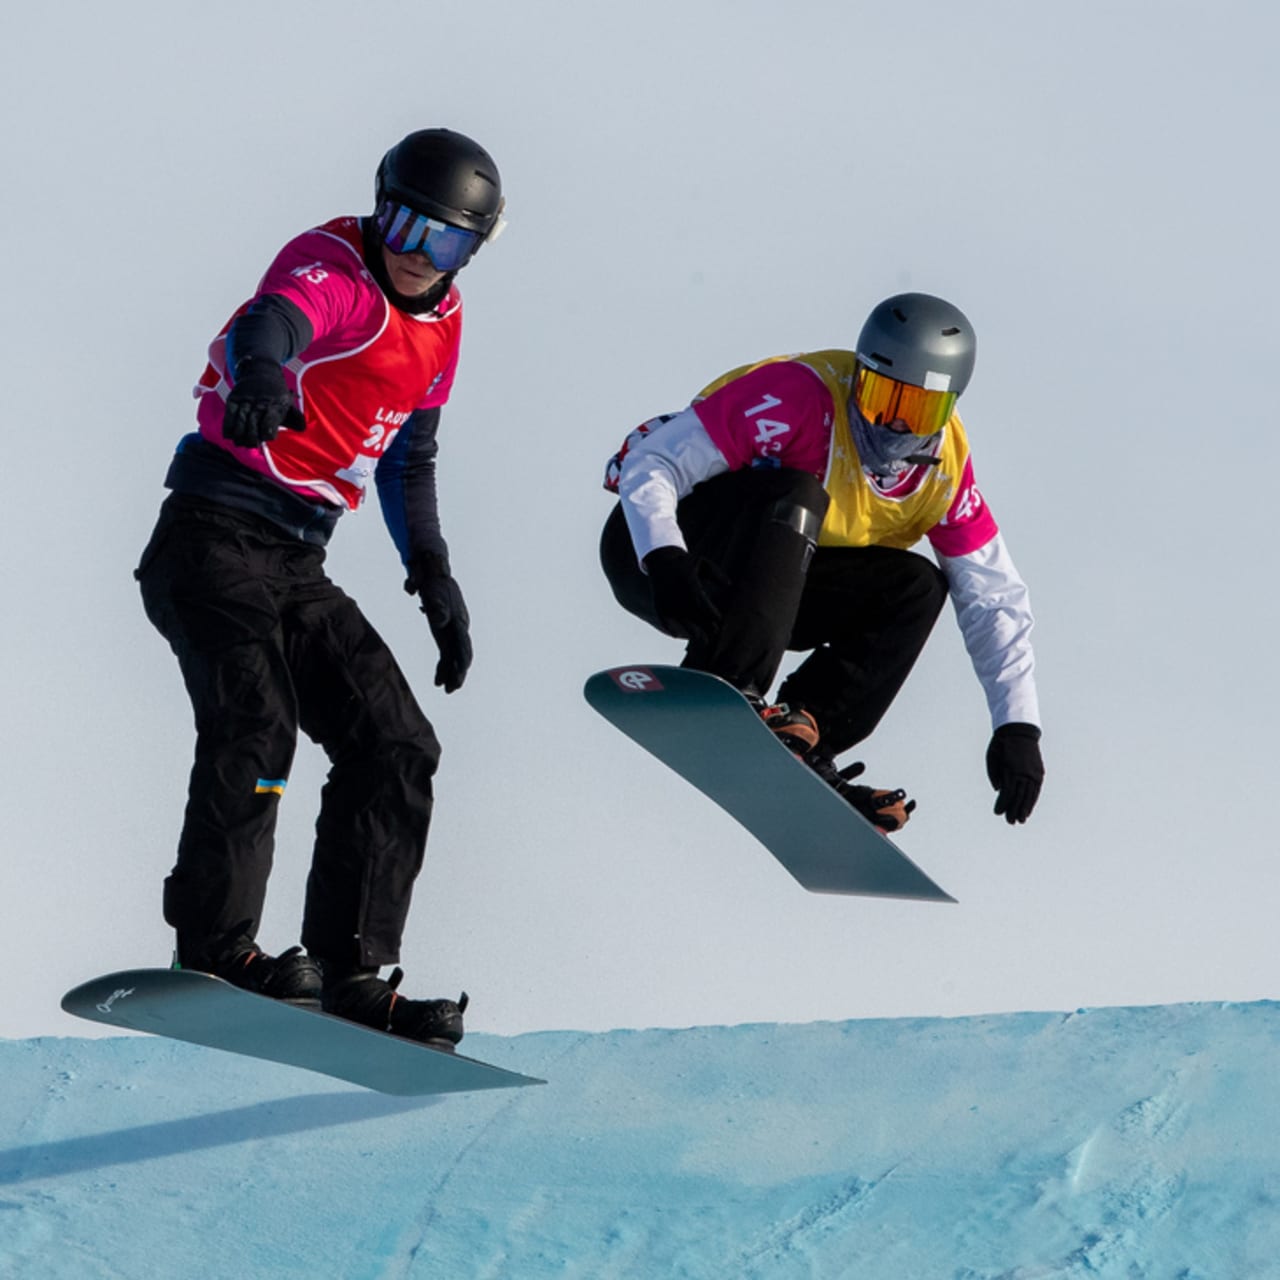 Snowboarding Halfpipe Live Youth Olympic Games 2020